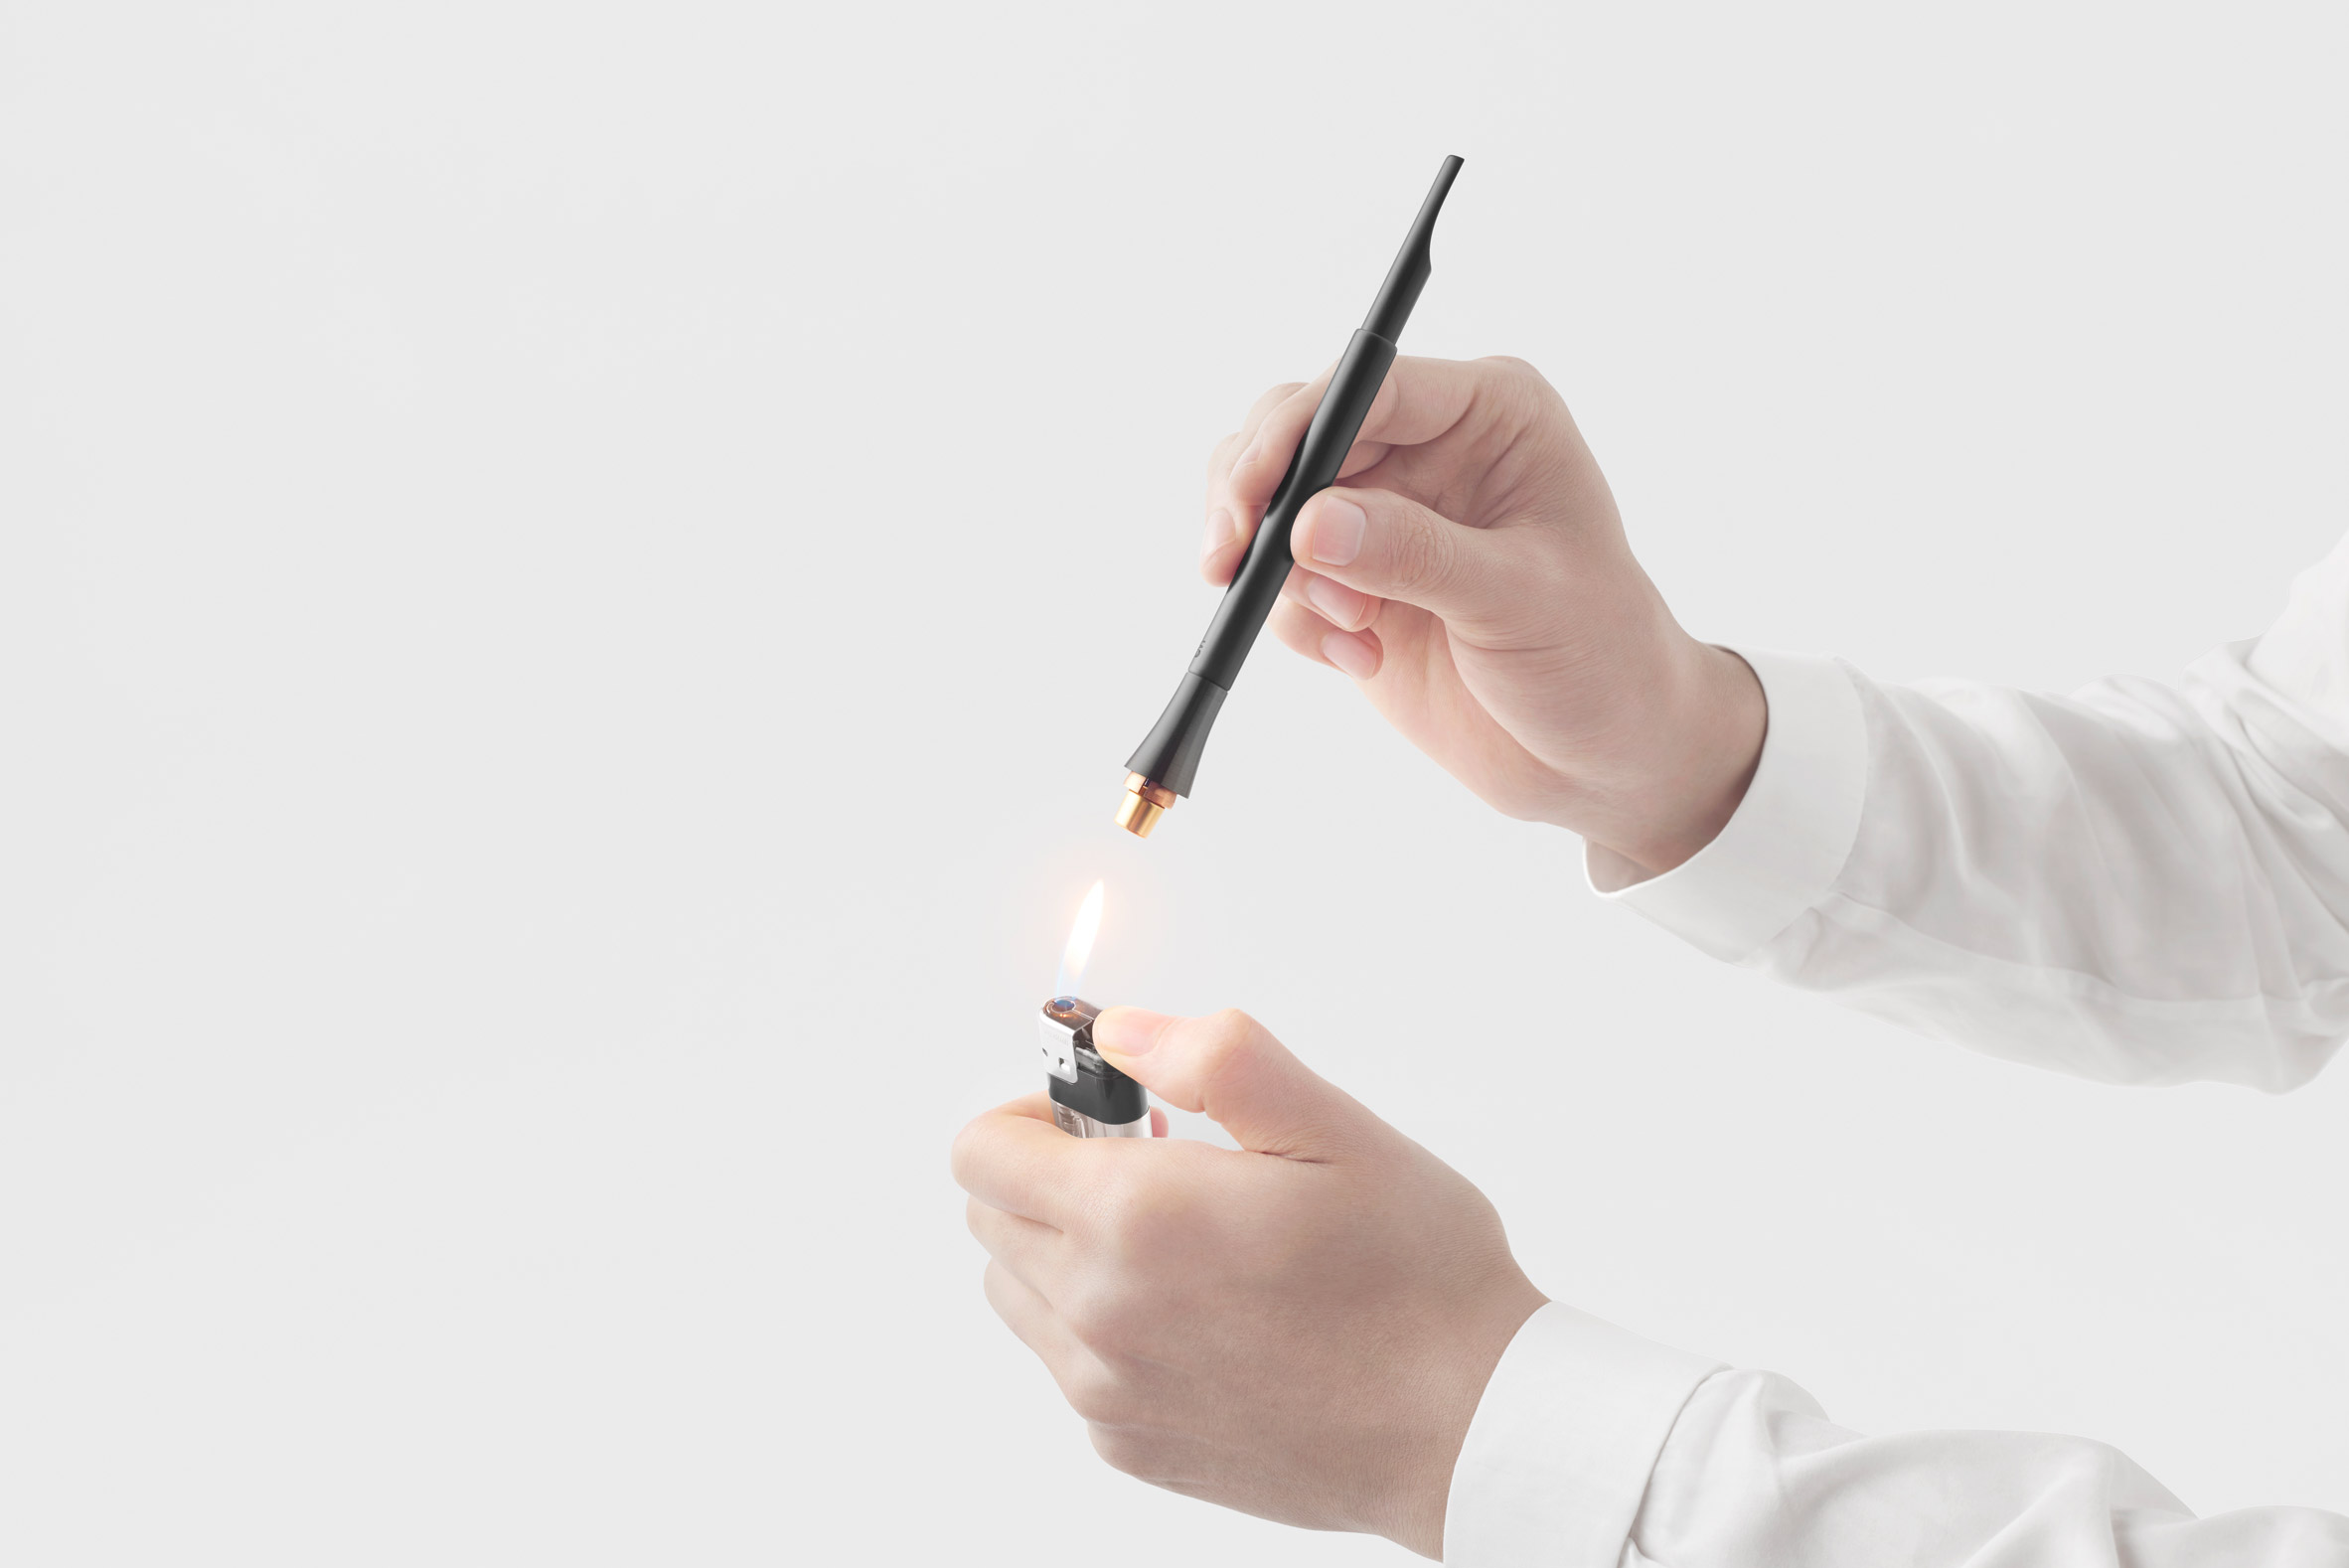 Nendo launches "third cigarette" as alternative for smokers